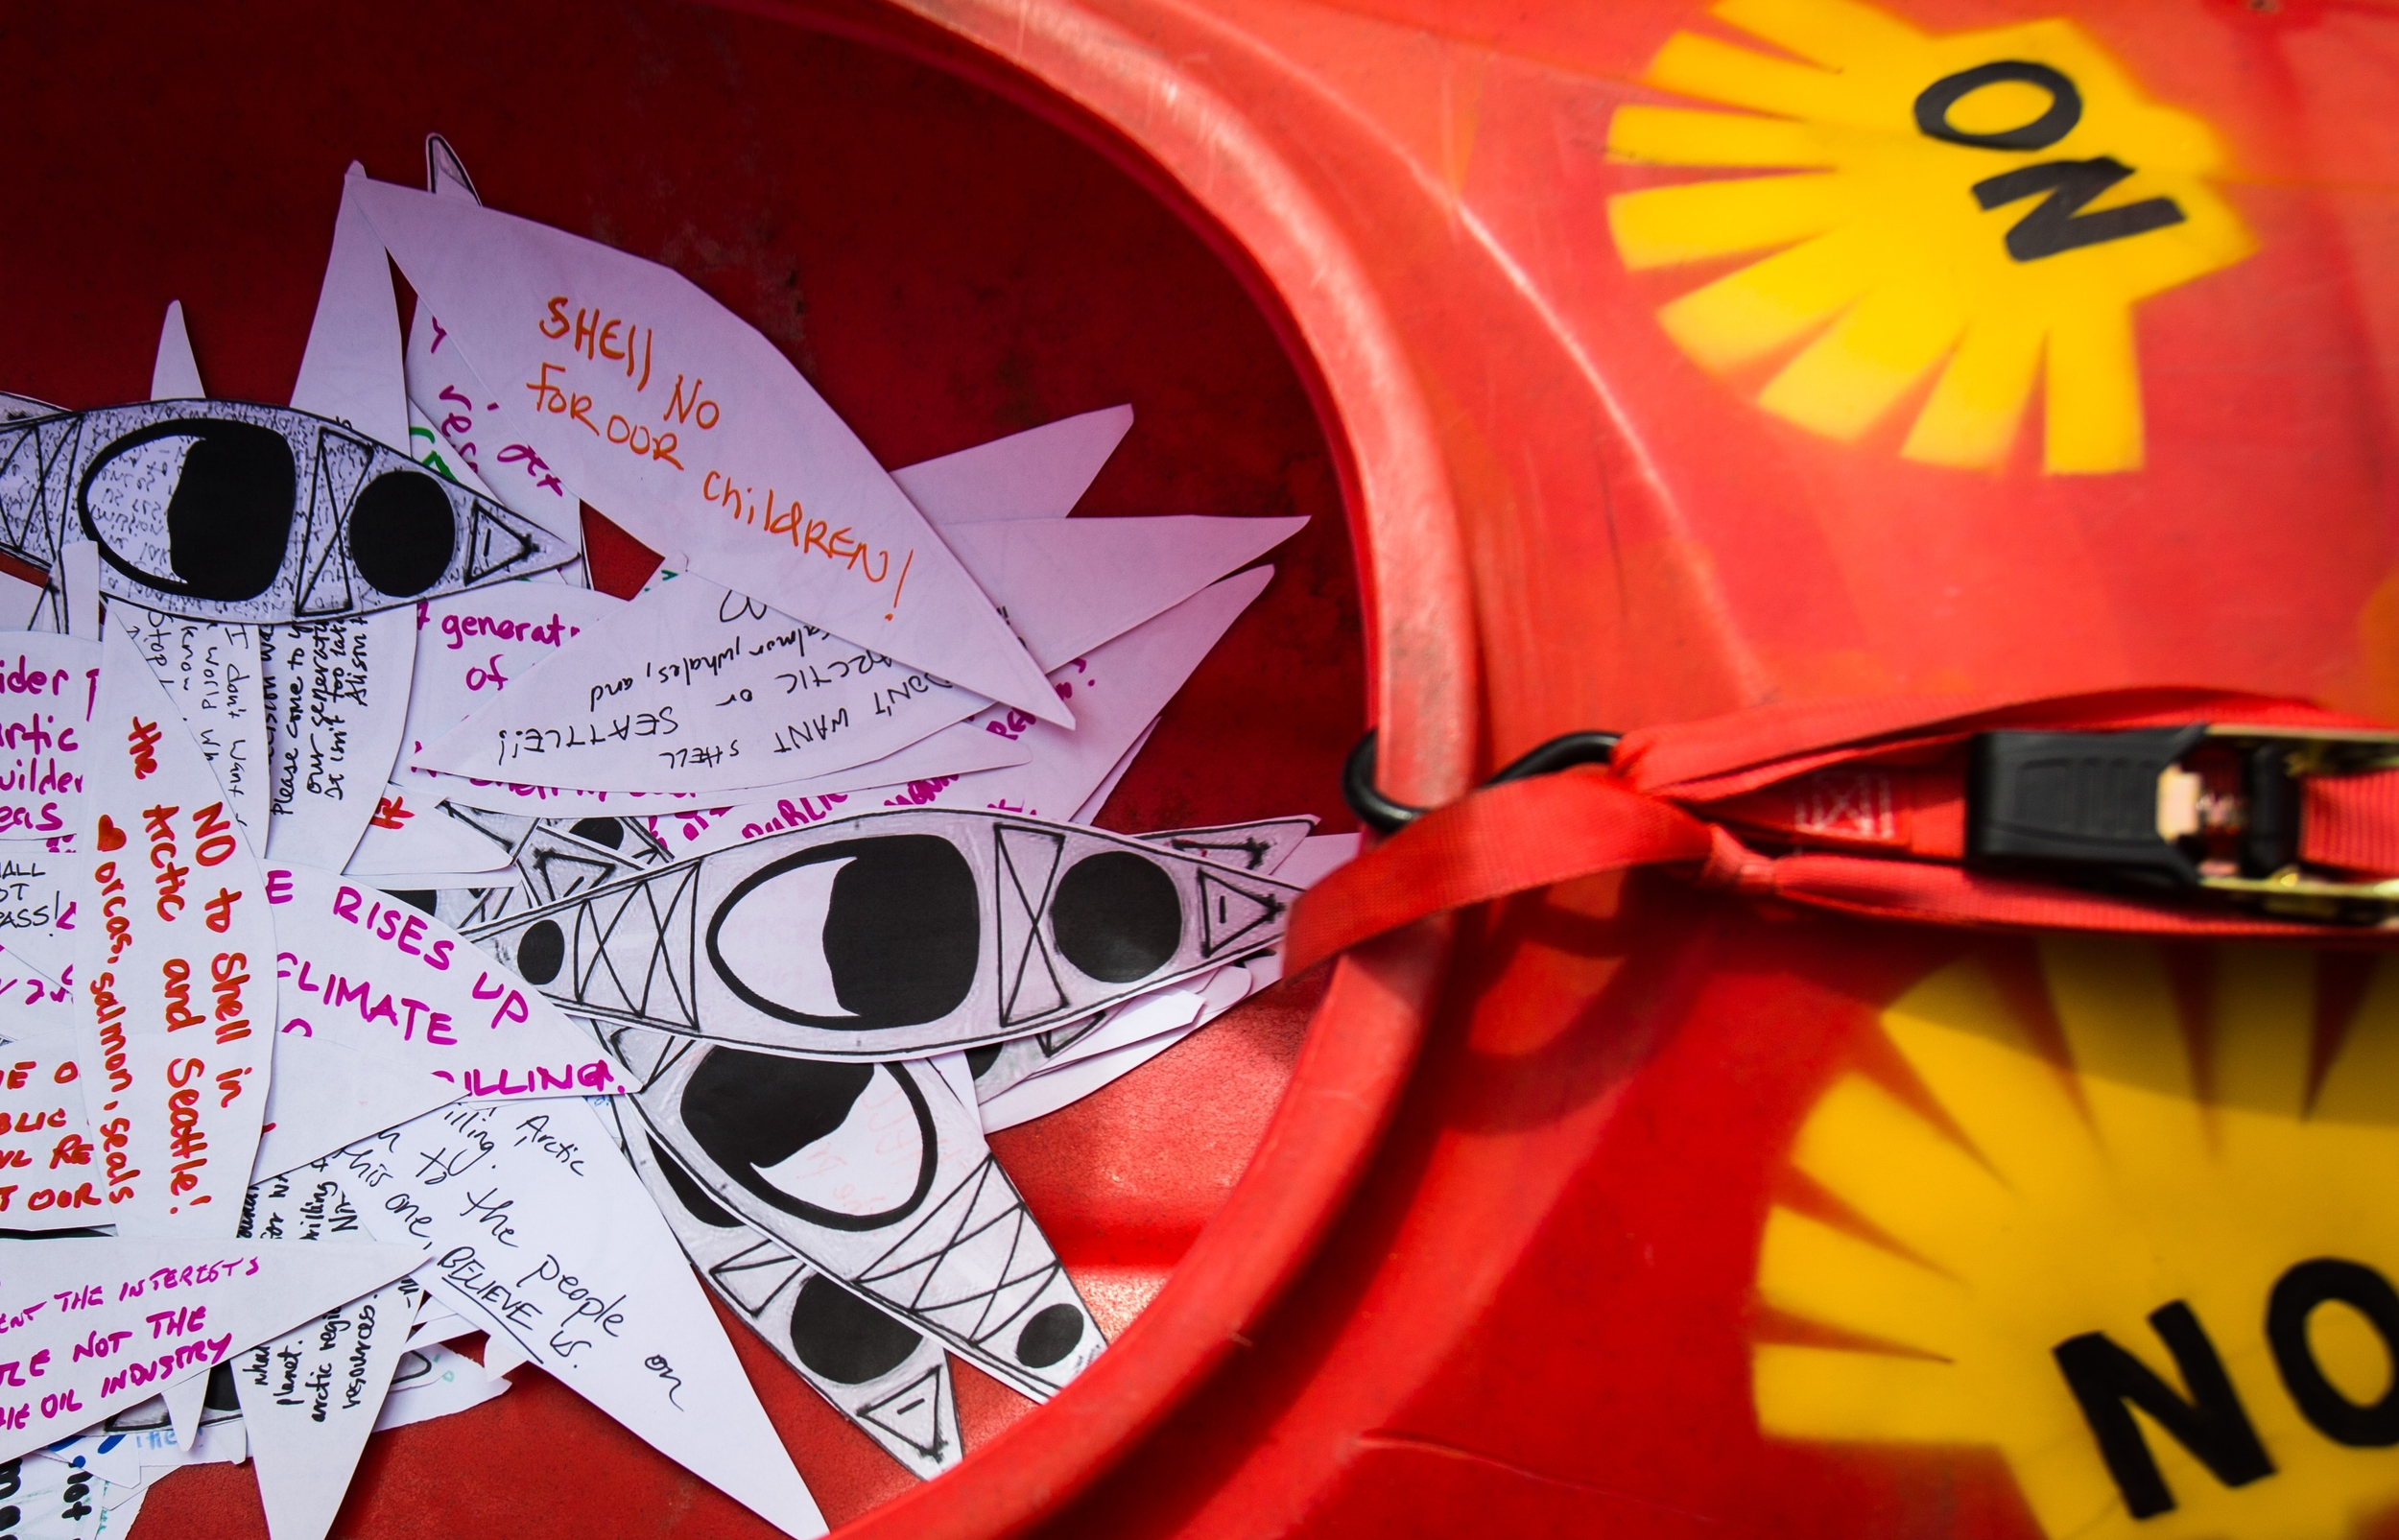   Paper Kayaks with notes protesting the planned arrival of Shell's oil drilling rig pile up in a kayak waiting to be transported to the Port of Seattle during a protest at Myrtle Edwards Park on Sunday, April 26, 2015. Hundreds gathered for the "She